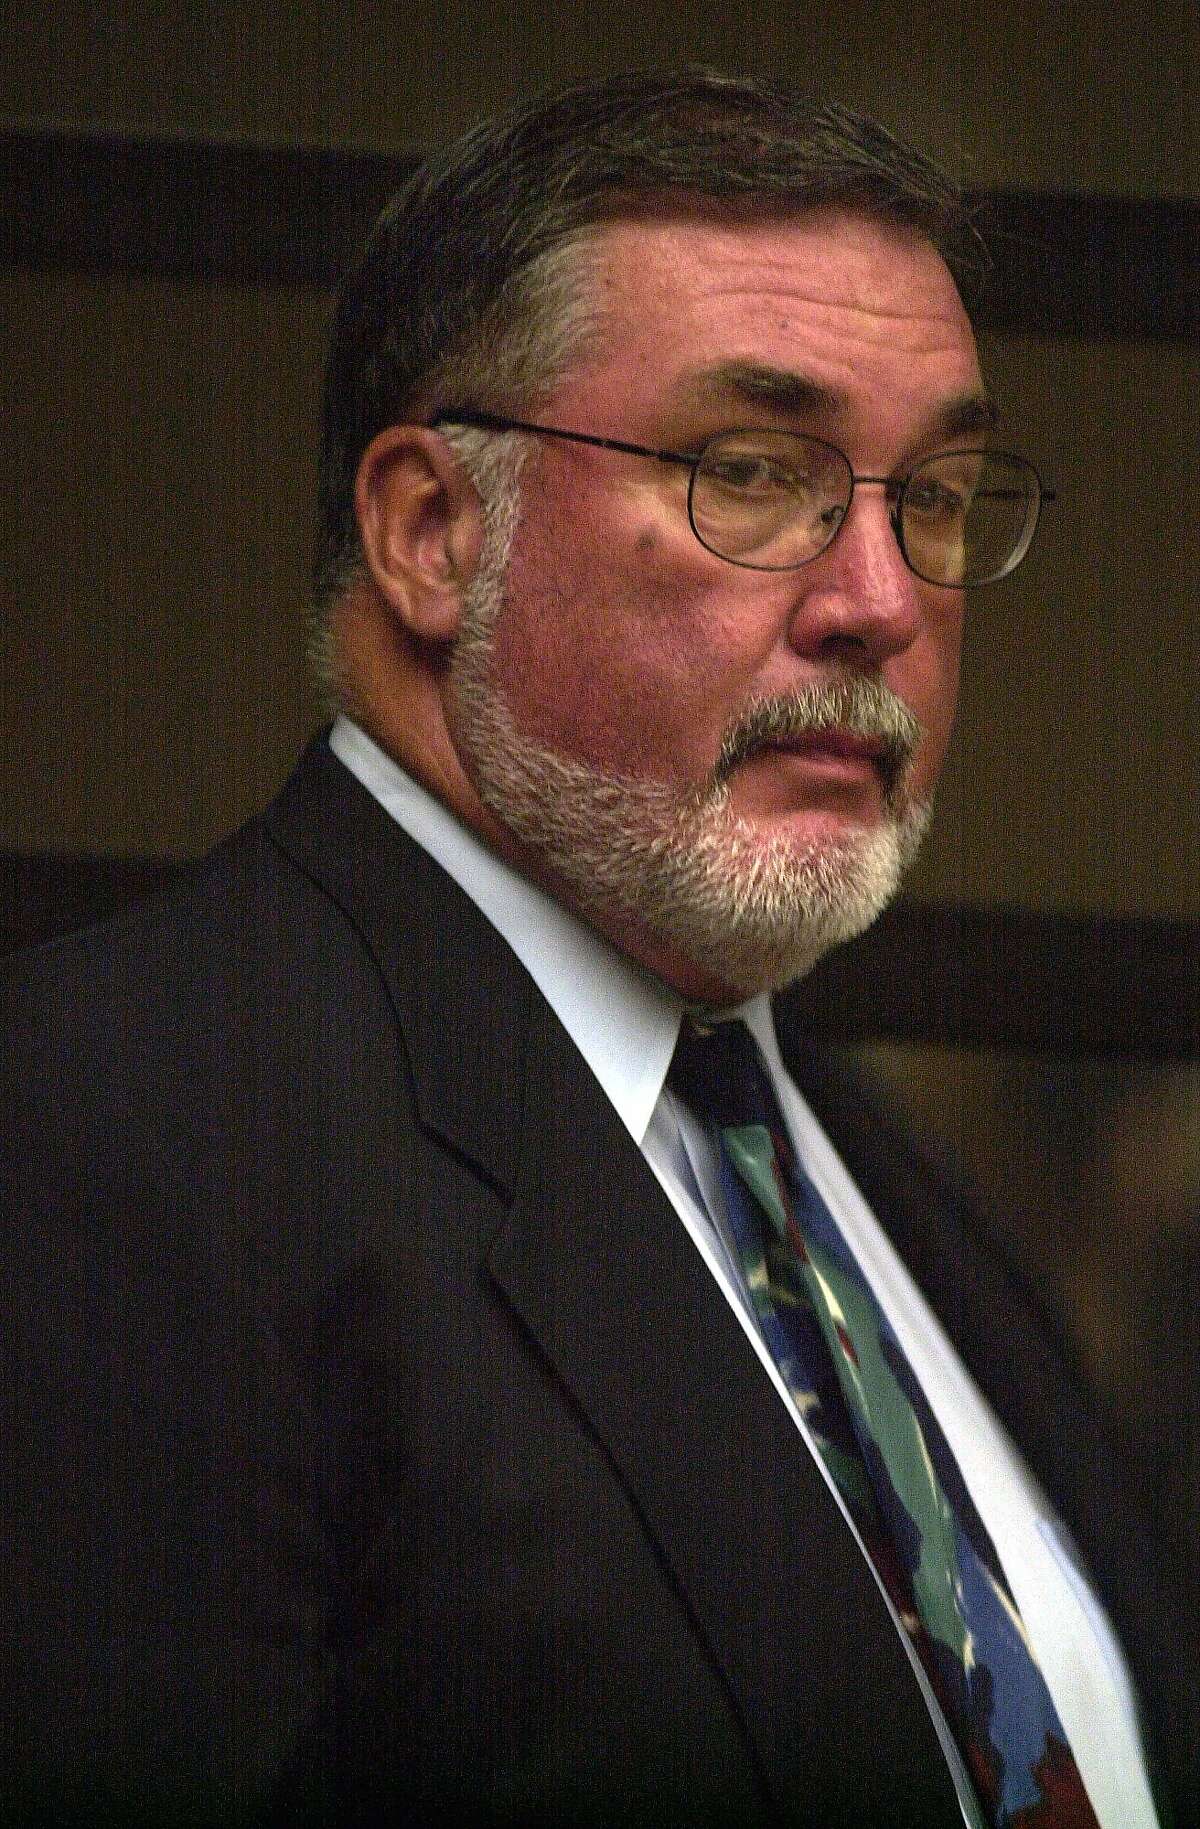 This July 24, 2003 photo shows former priest Stephen Kiesle during a hearing in Martinez, Calif. A letter obtained by the Associated Press and bearing the signature of future Pope Benedict XVI shows then-Cardinal Joseph Ratzinger resisted defrocking Kiesle, who had a record of sexually molesting children, after his case had languished for four years at the Vatican. The 1985 letter was typed in Latin and is part of years of correspondence between the Diocese of Oakland and the Vatican about the proposed defrocking of Rev. Kiesle. (AP Photo/Bay Area News Group, Susan Tripp Pollard) MANDATORY CREDIT, NO SALES, MAGS OUT